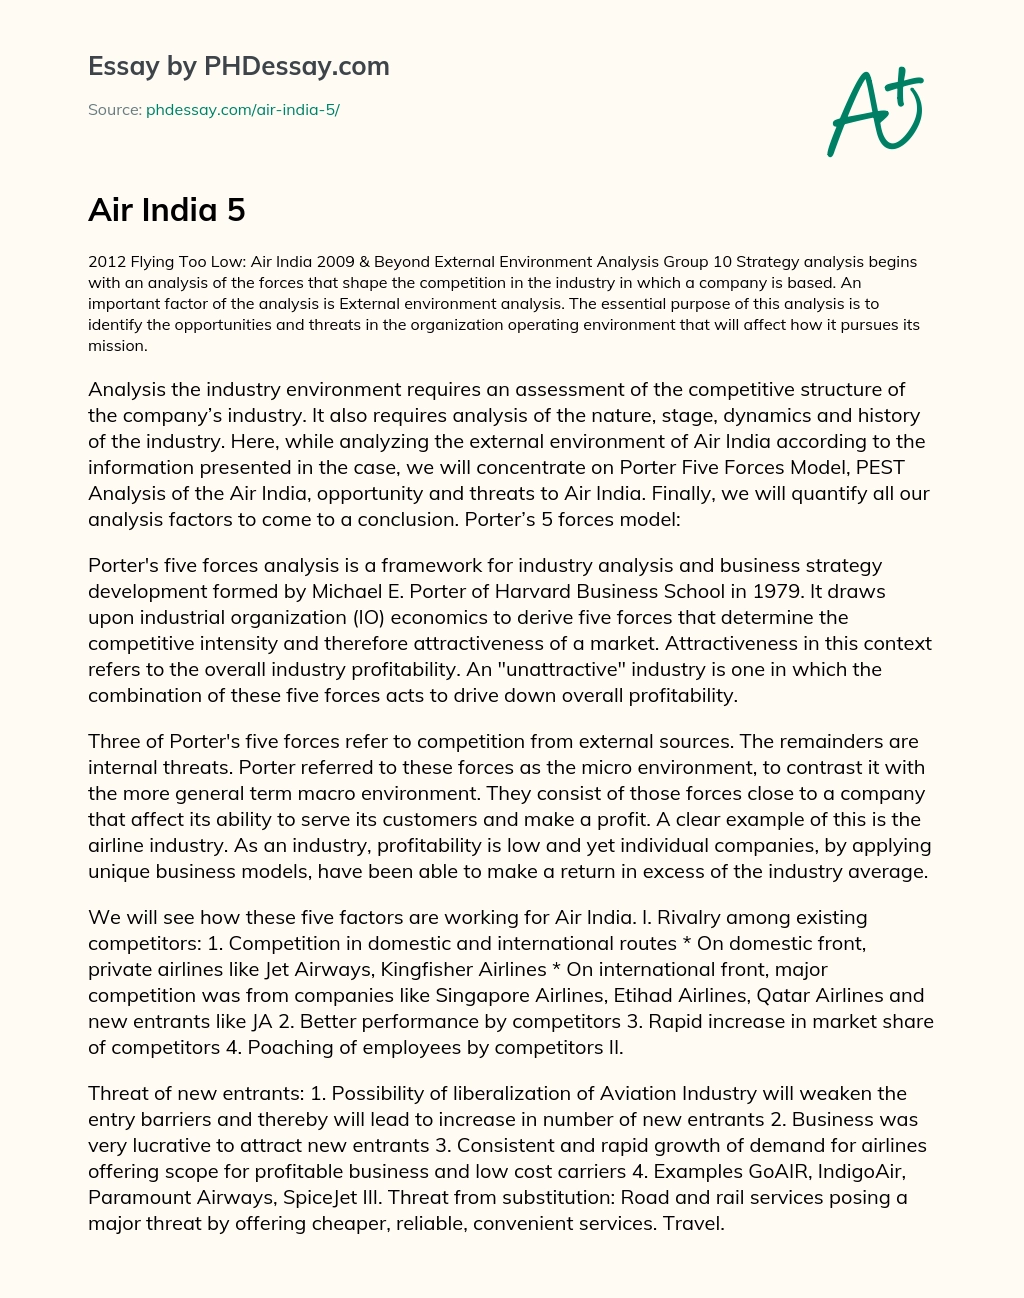 Analyzing the External Environment of Air India: Porter’s Five Forces and PEST Analysis essay